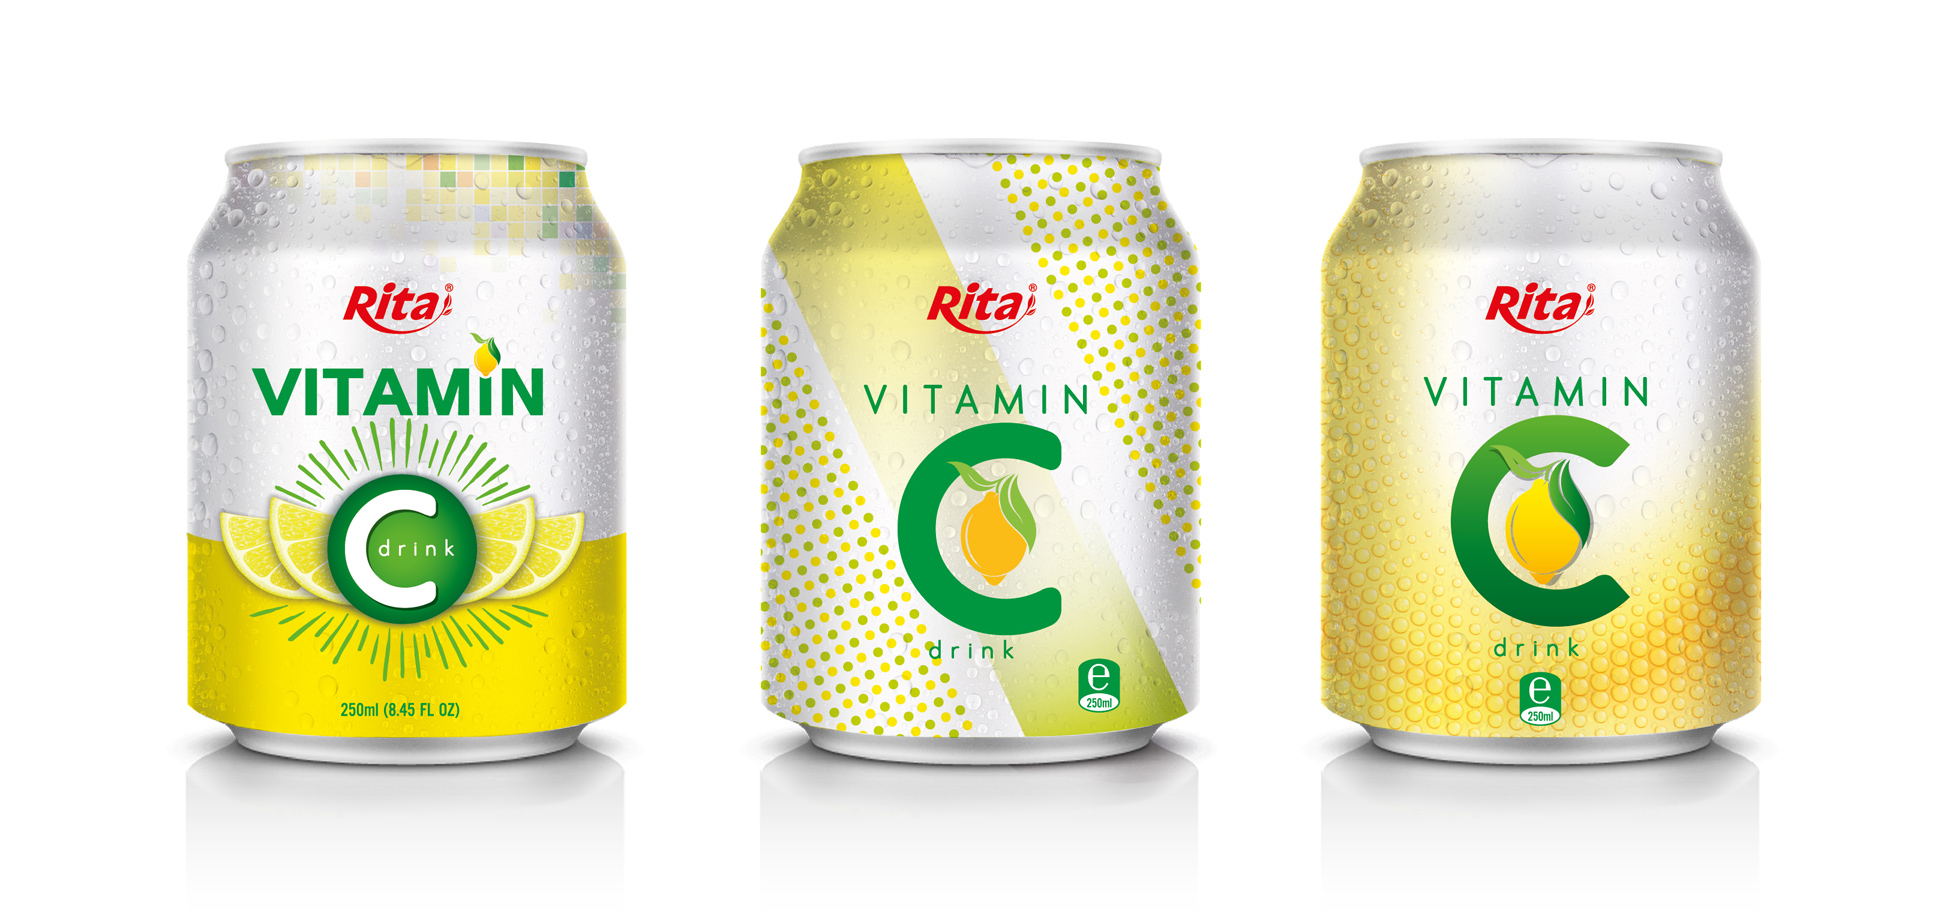 Vitamin C drink 250ml in can